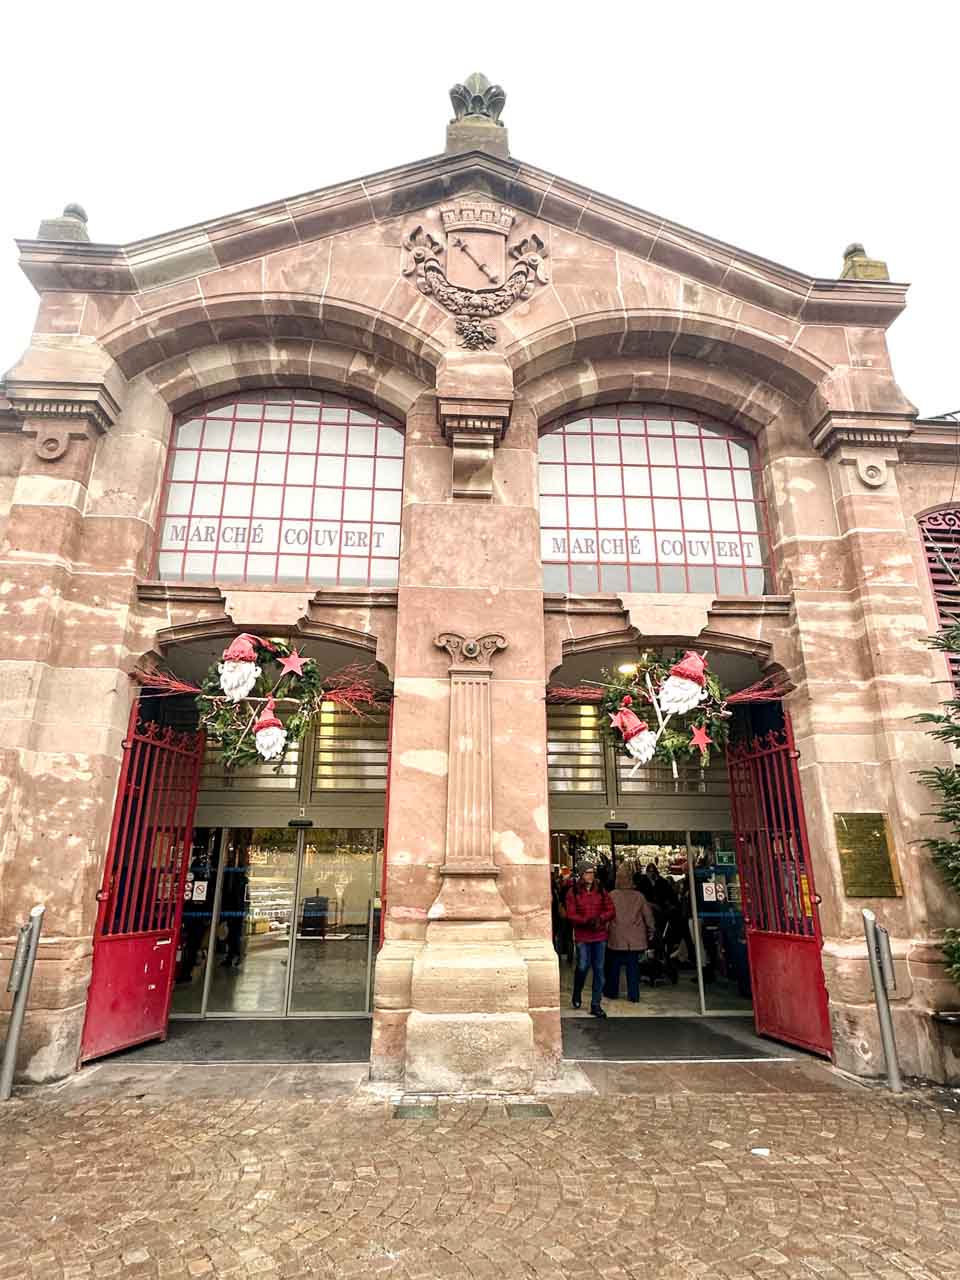 The front of Colmar's covered market, Marché Couvert, decorated with Christmas wreaths